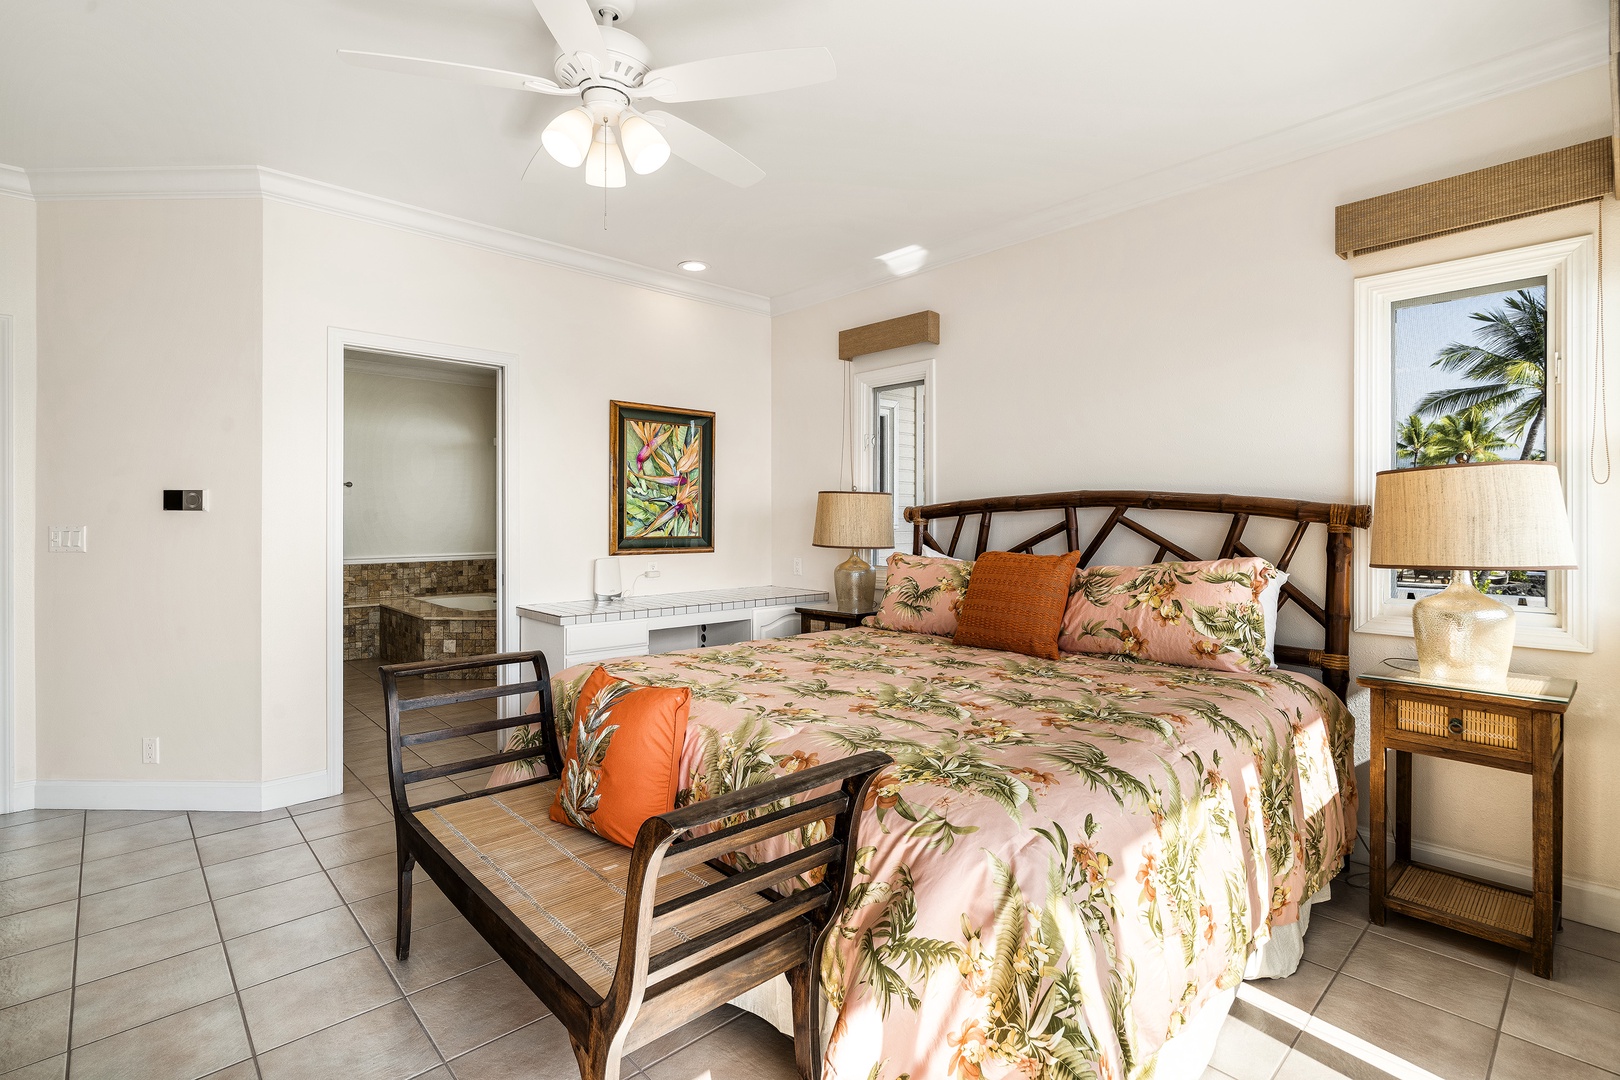 Kailua Kona Vacation Rentals, Dolphin Manor - Equipped with King sized bed, ensuite, A/C, Lanai access, and TV